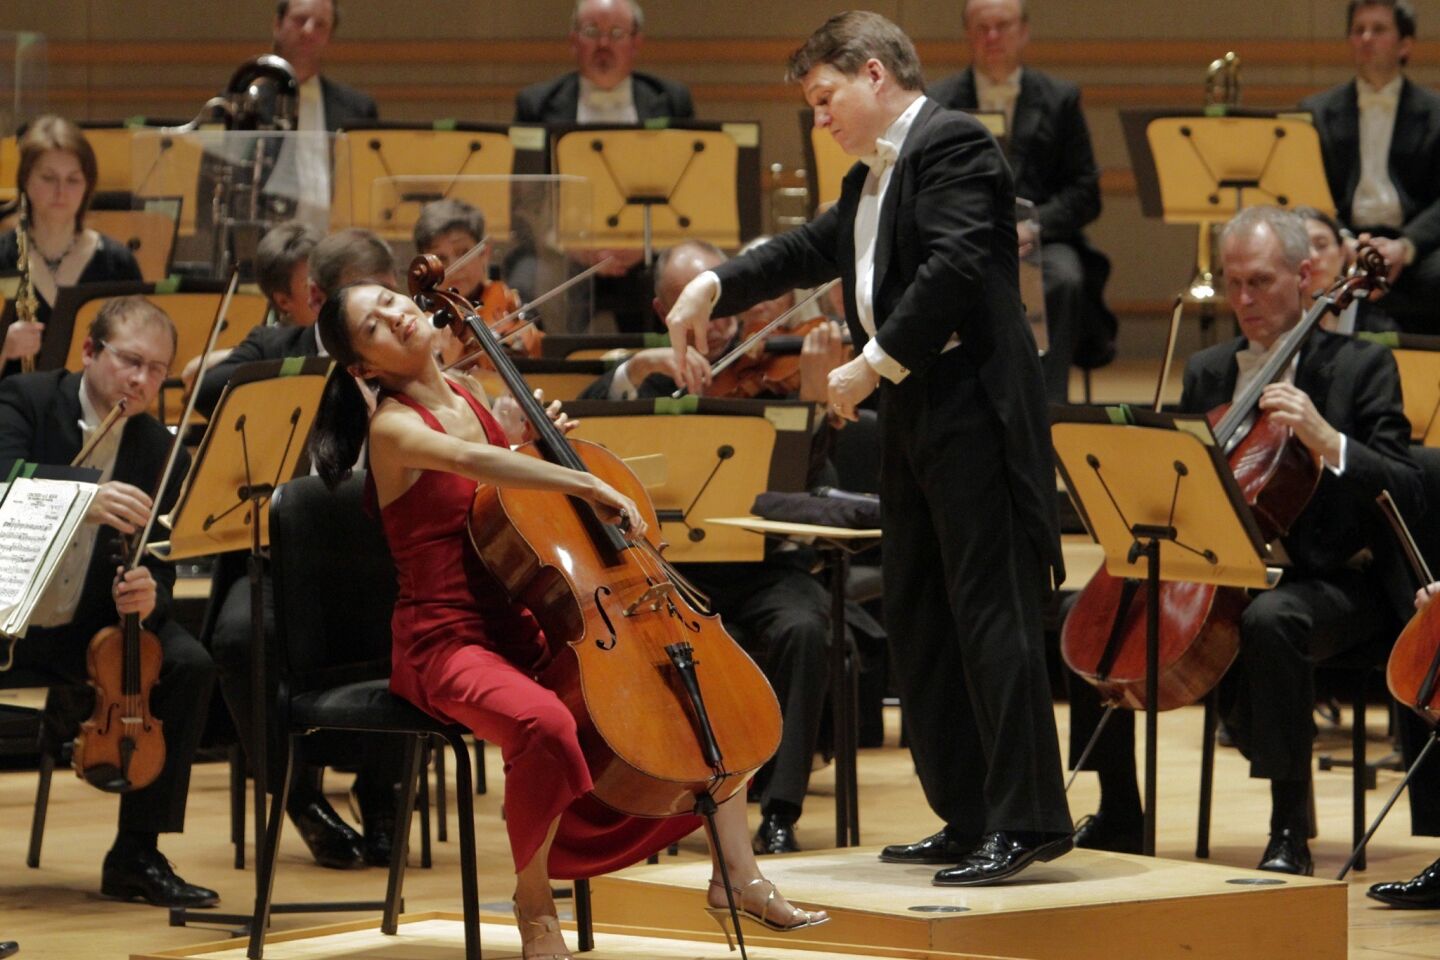 Arts and culture in pictures by The Times | Cellist Sophie Shao